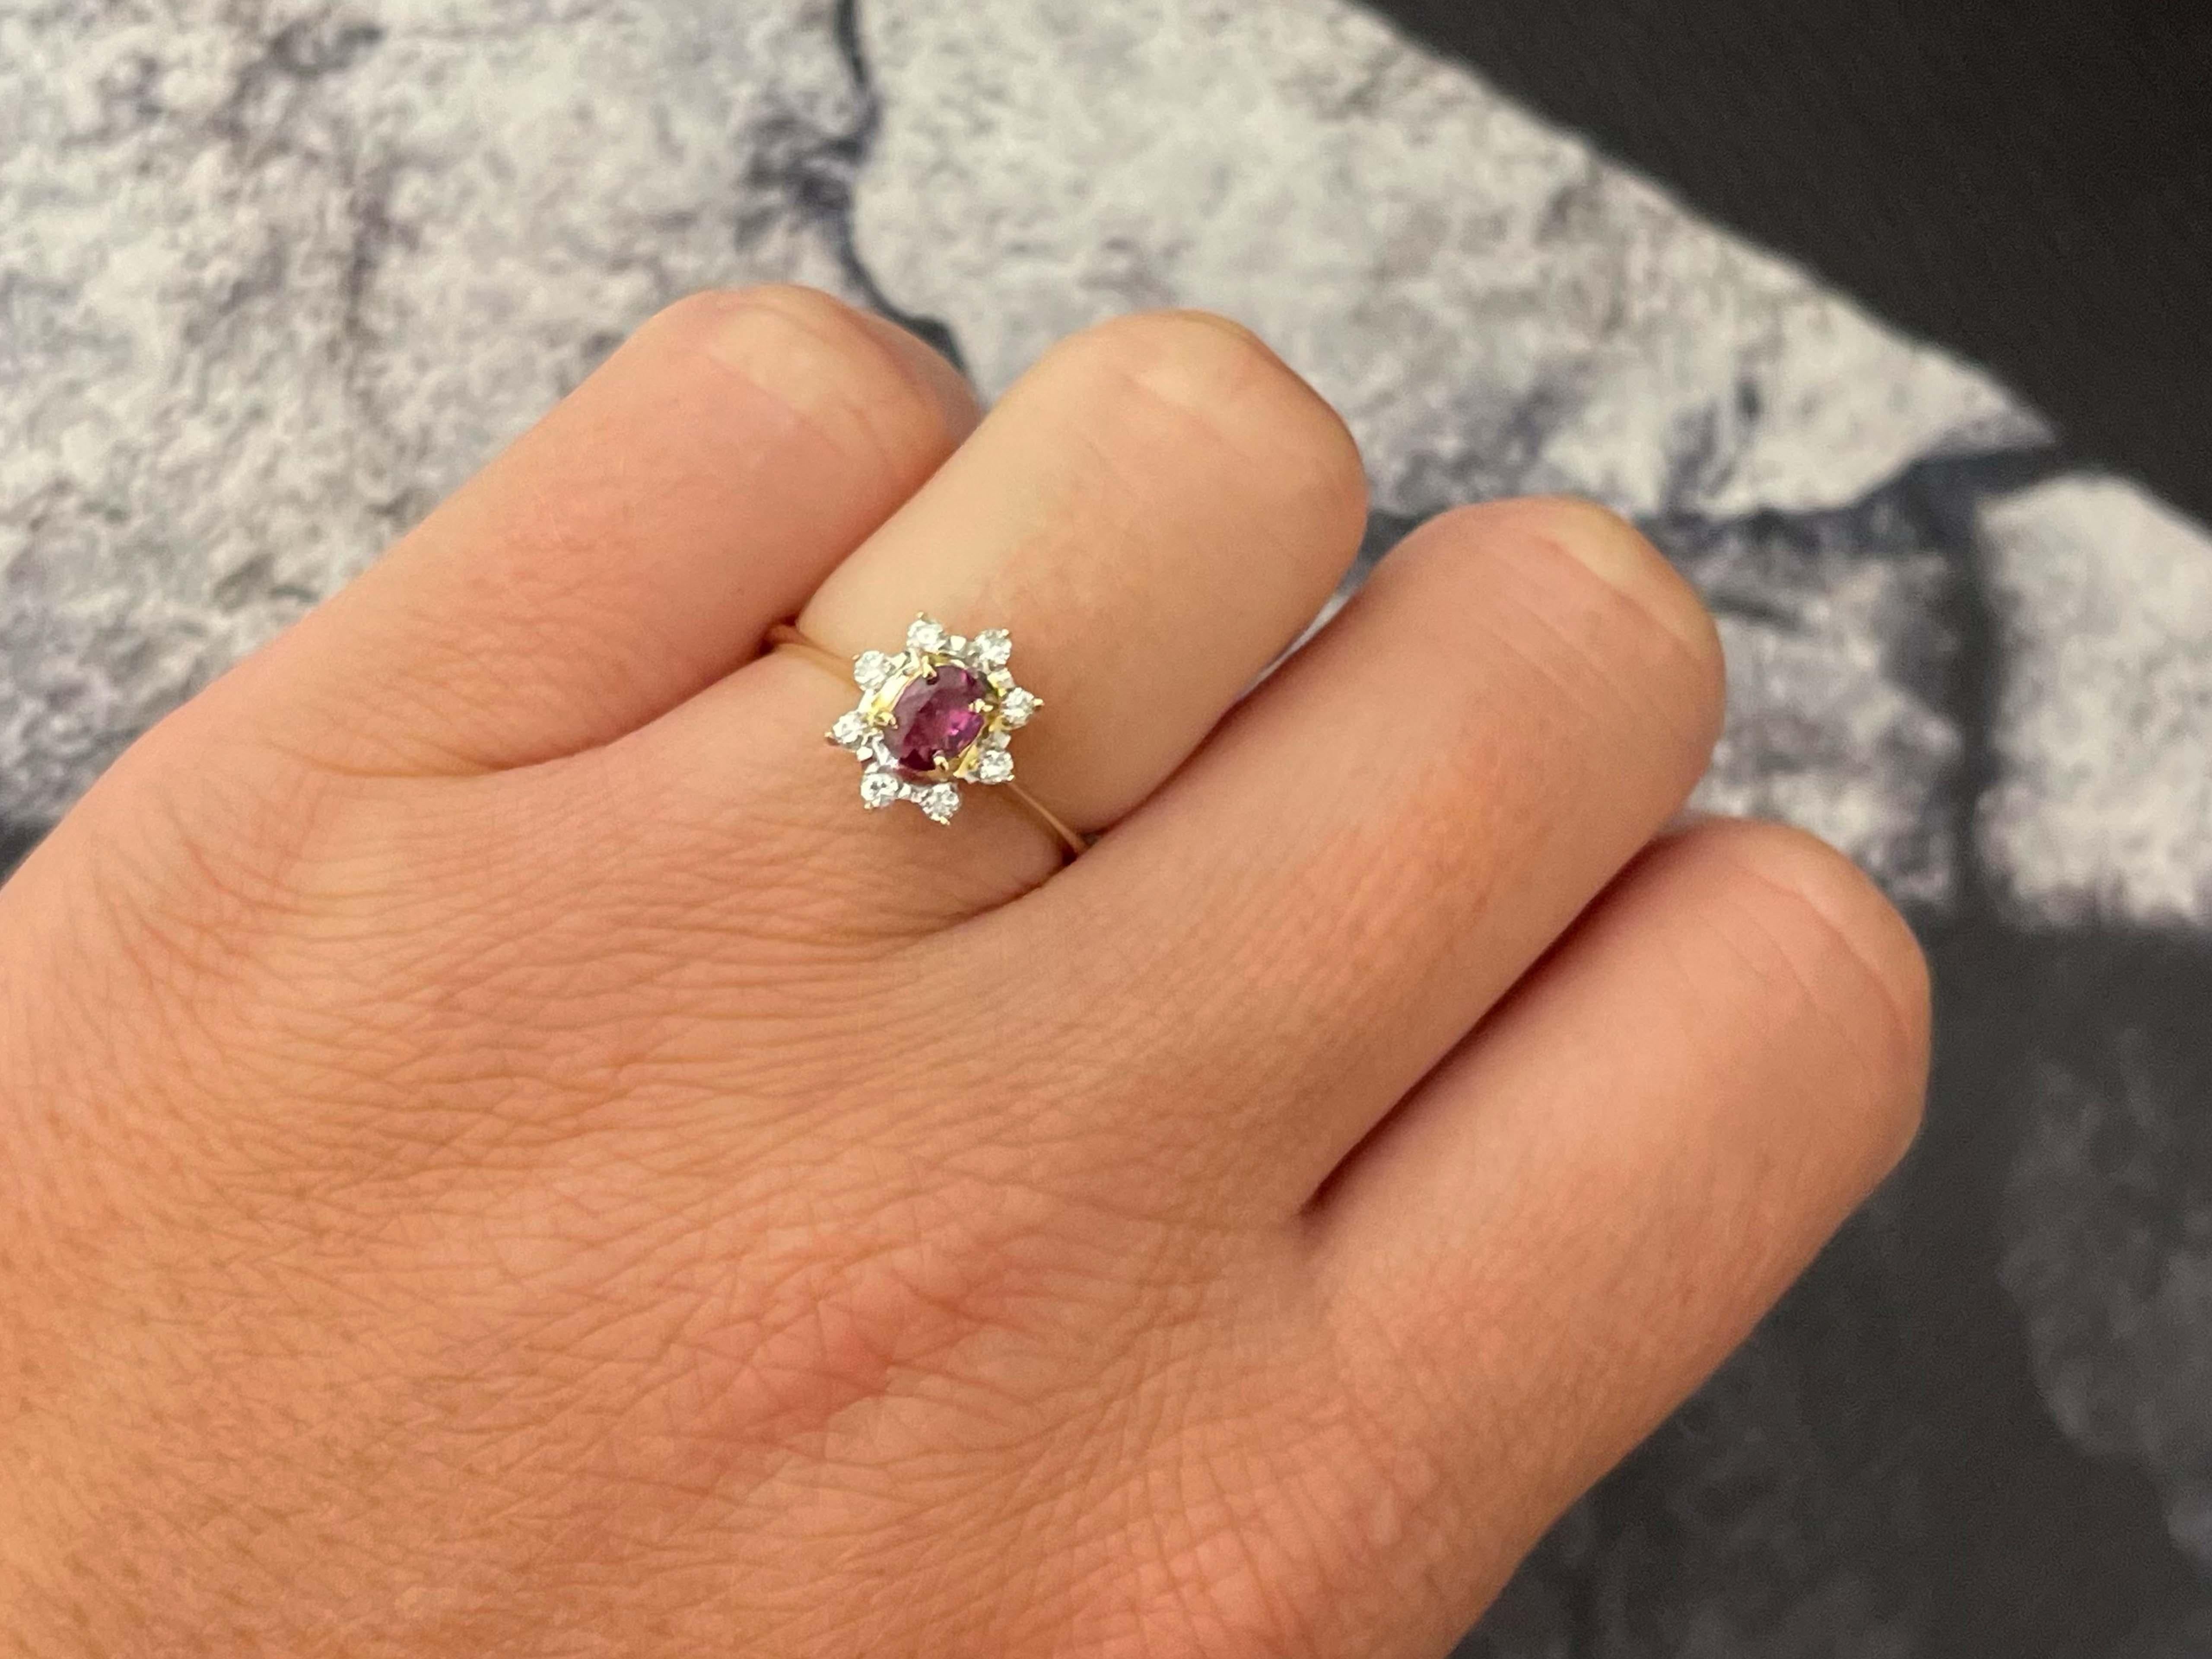 Item Specifications:

Metal: 14K Yellow Gold

Style: Statement Ring

Ring Size: 6.25 (resizing available for a fee)

Total Weight: 2.0 Grams

Gemstone Specifications:

Gemstones: 1 red ruby

Ruby Carat Weight: 0.29 carats

Diamond Carat Weight: 0.08